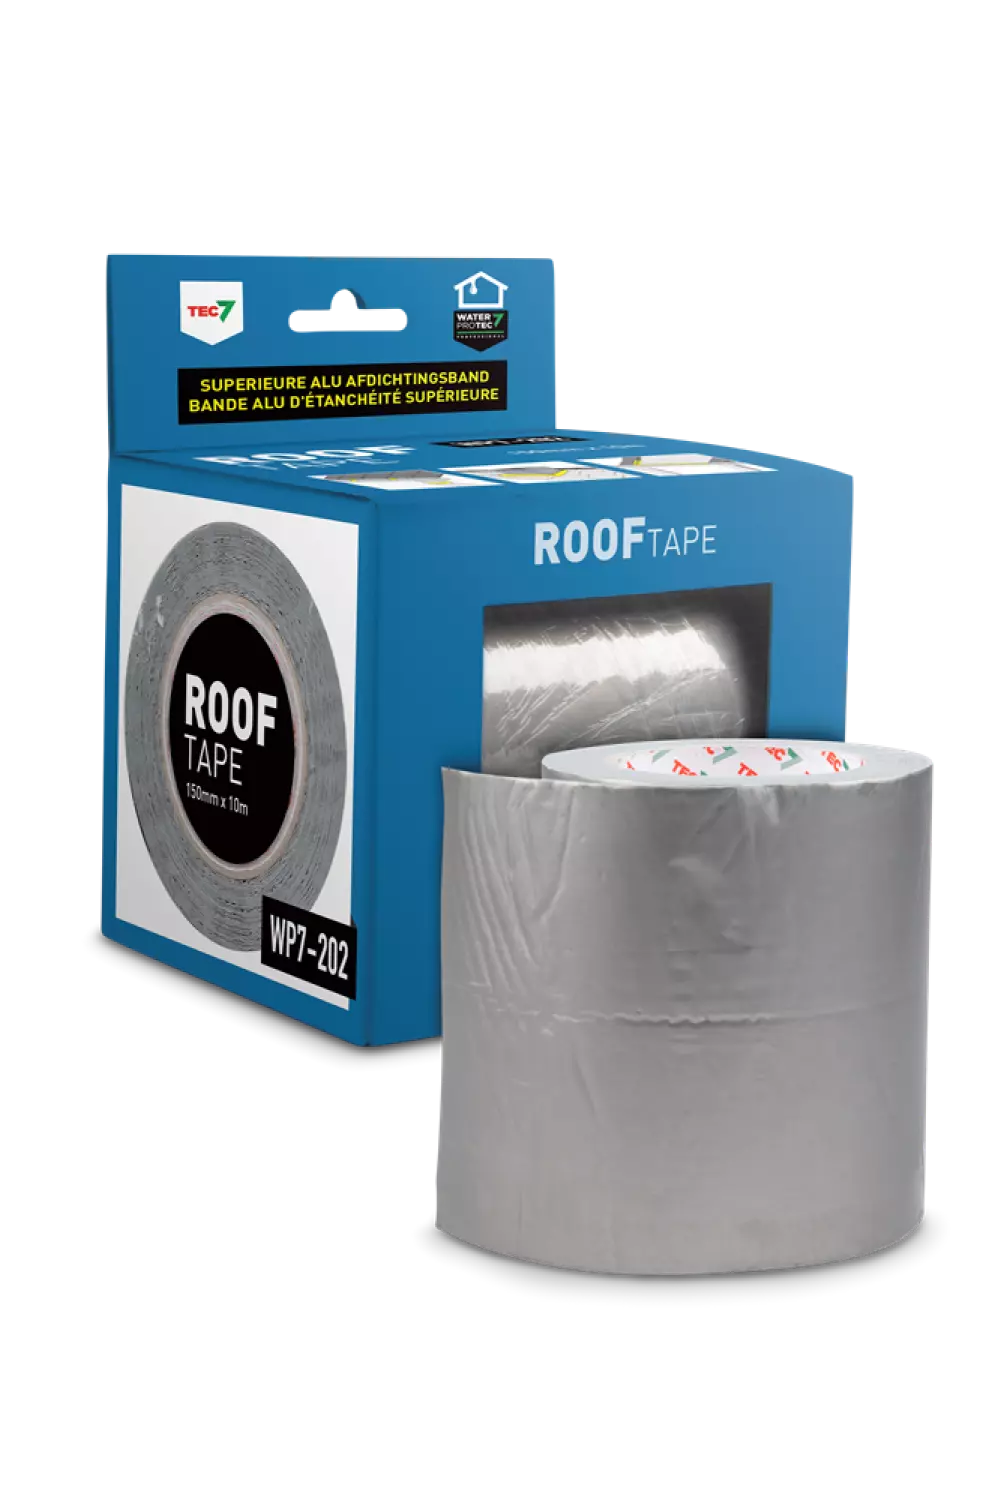 TEC7 603160000 WP7-202 Roof Tape - 150mmx10m-image